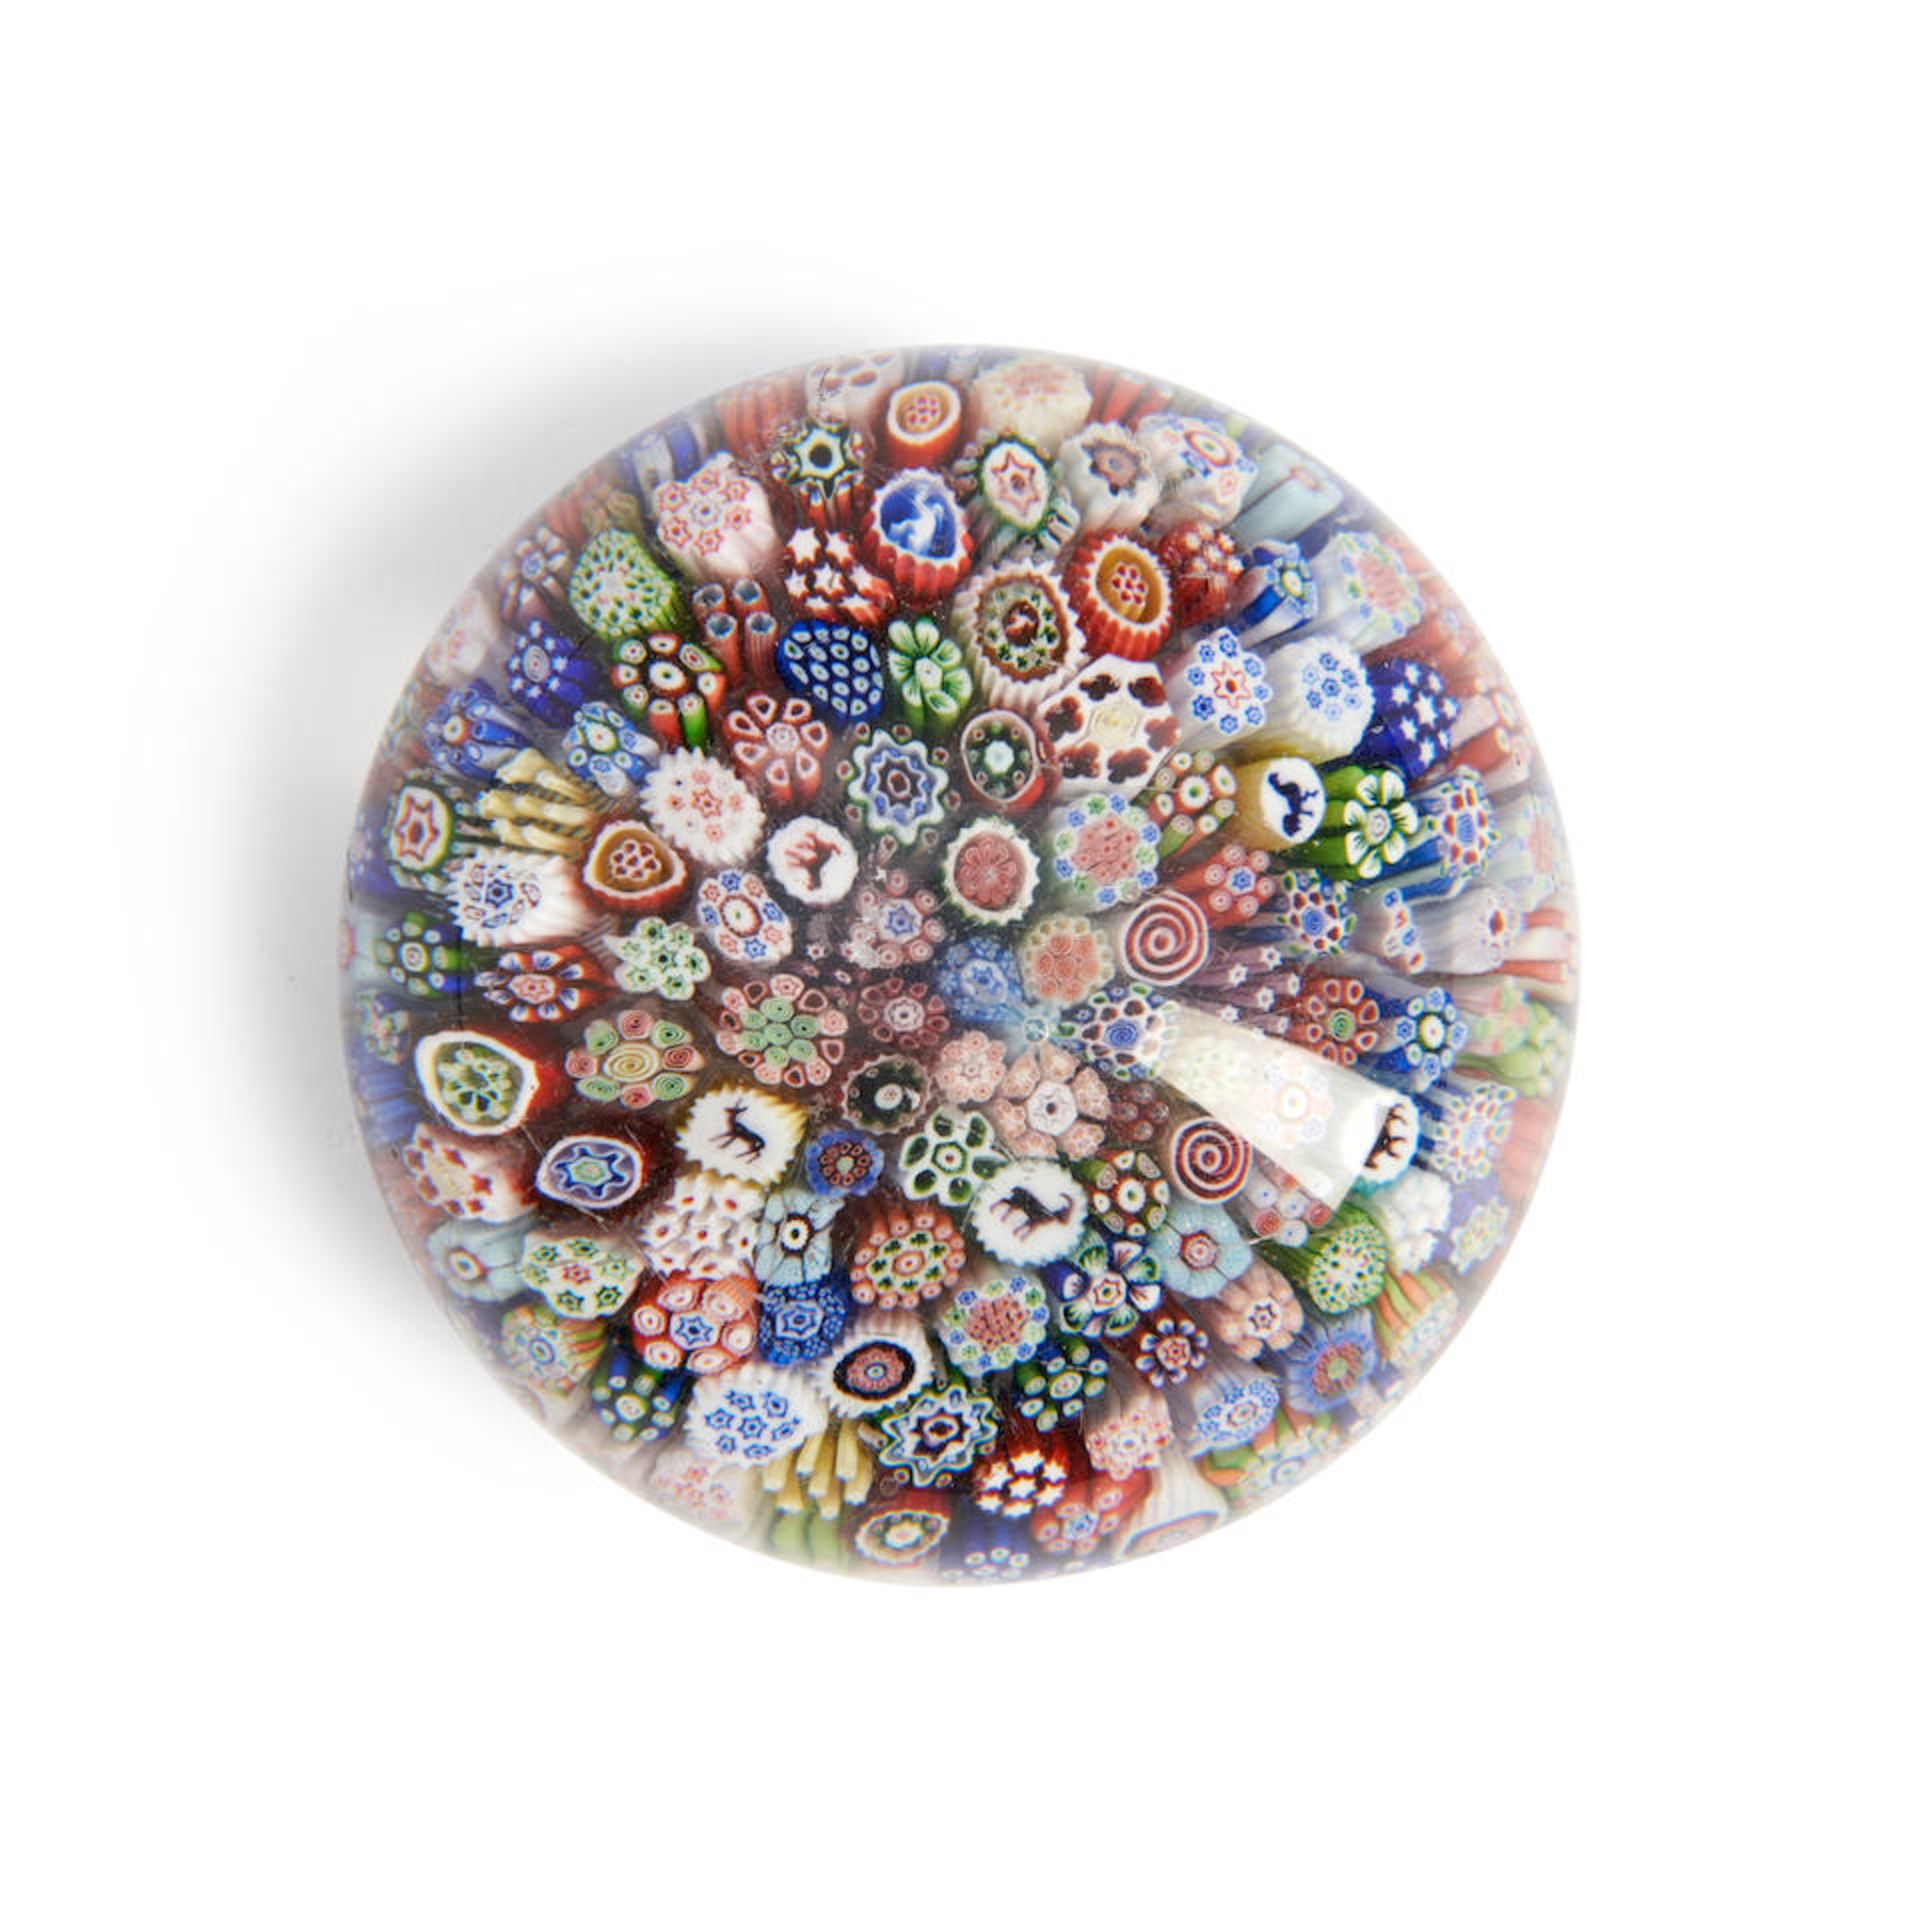 BACCARAT CLOSE-PACKED MILLEFIORI GLASS PAPERWEIGHT, France, date 1848, several silhouette canes,...